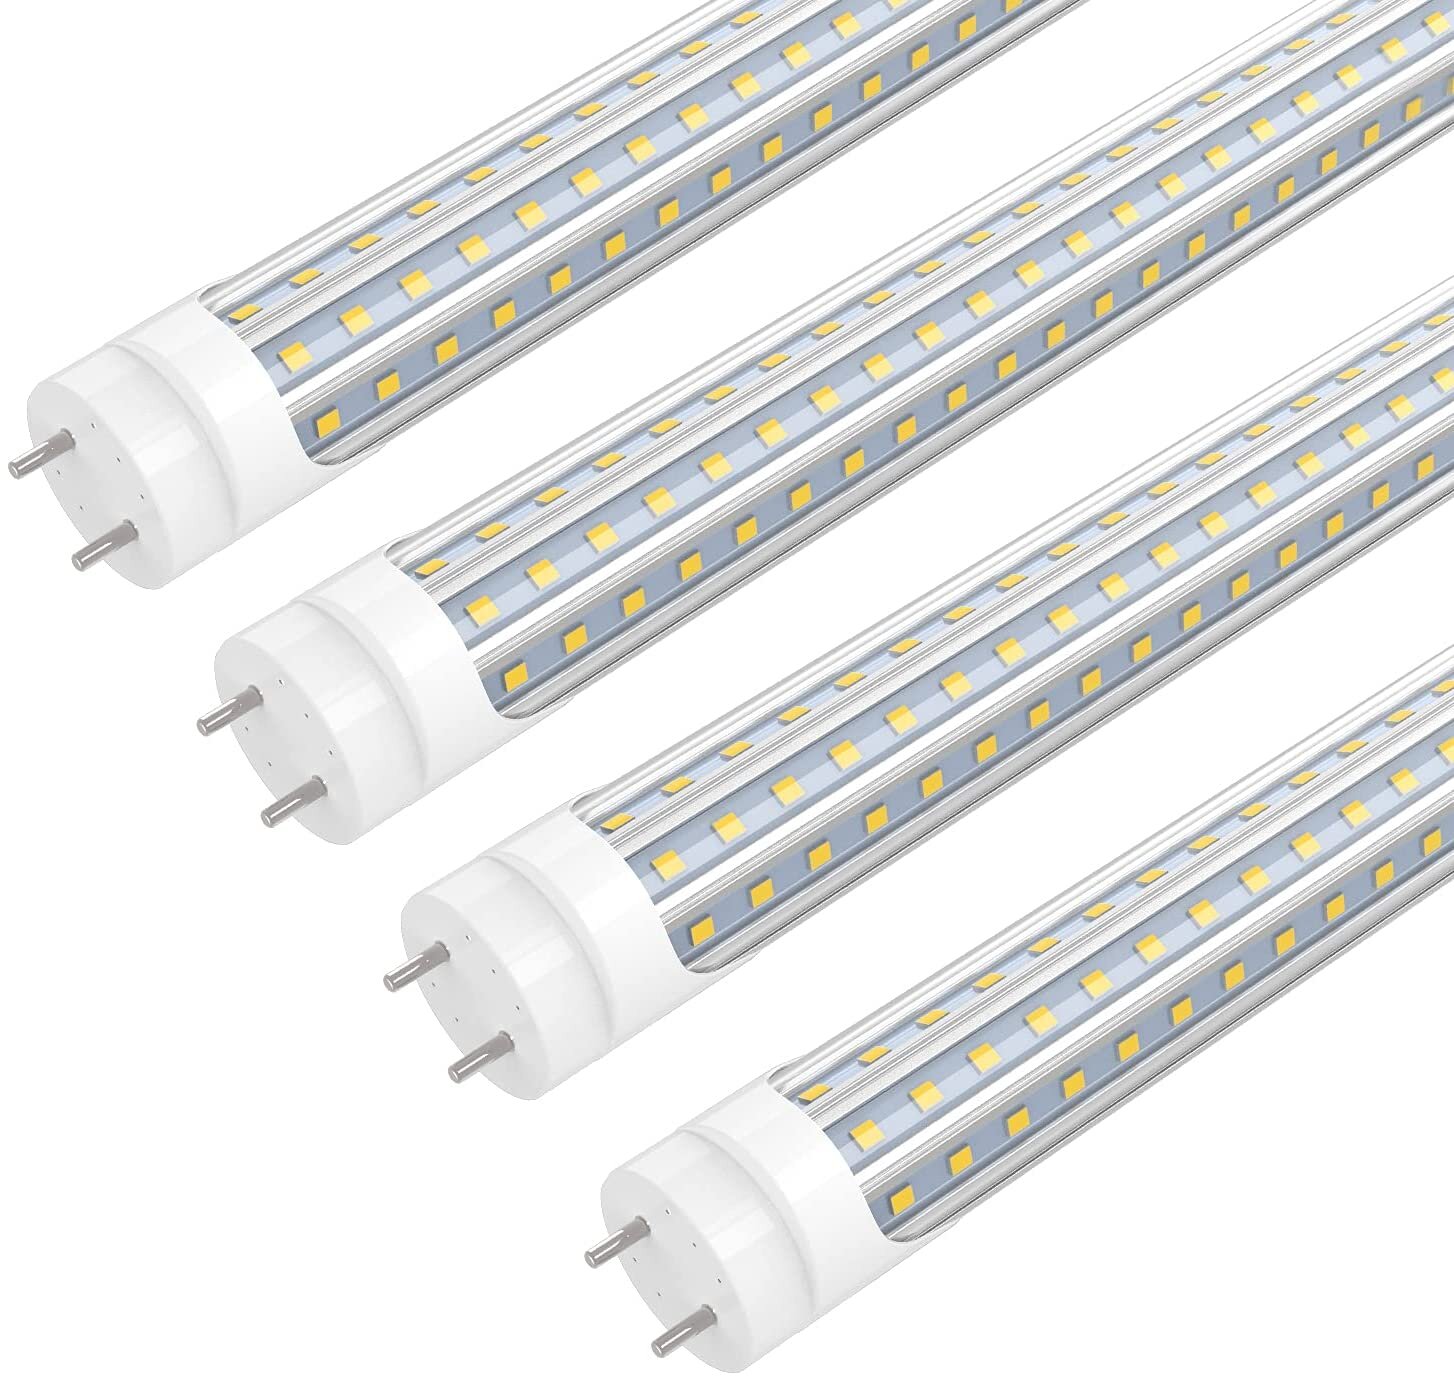 10-PACK 40W 8 Foot T8 T12 LED Light Tube R17D Base Dual-Ended Power Clear 6000K 